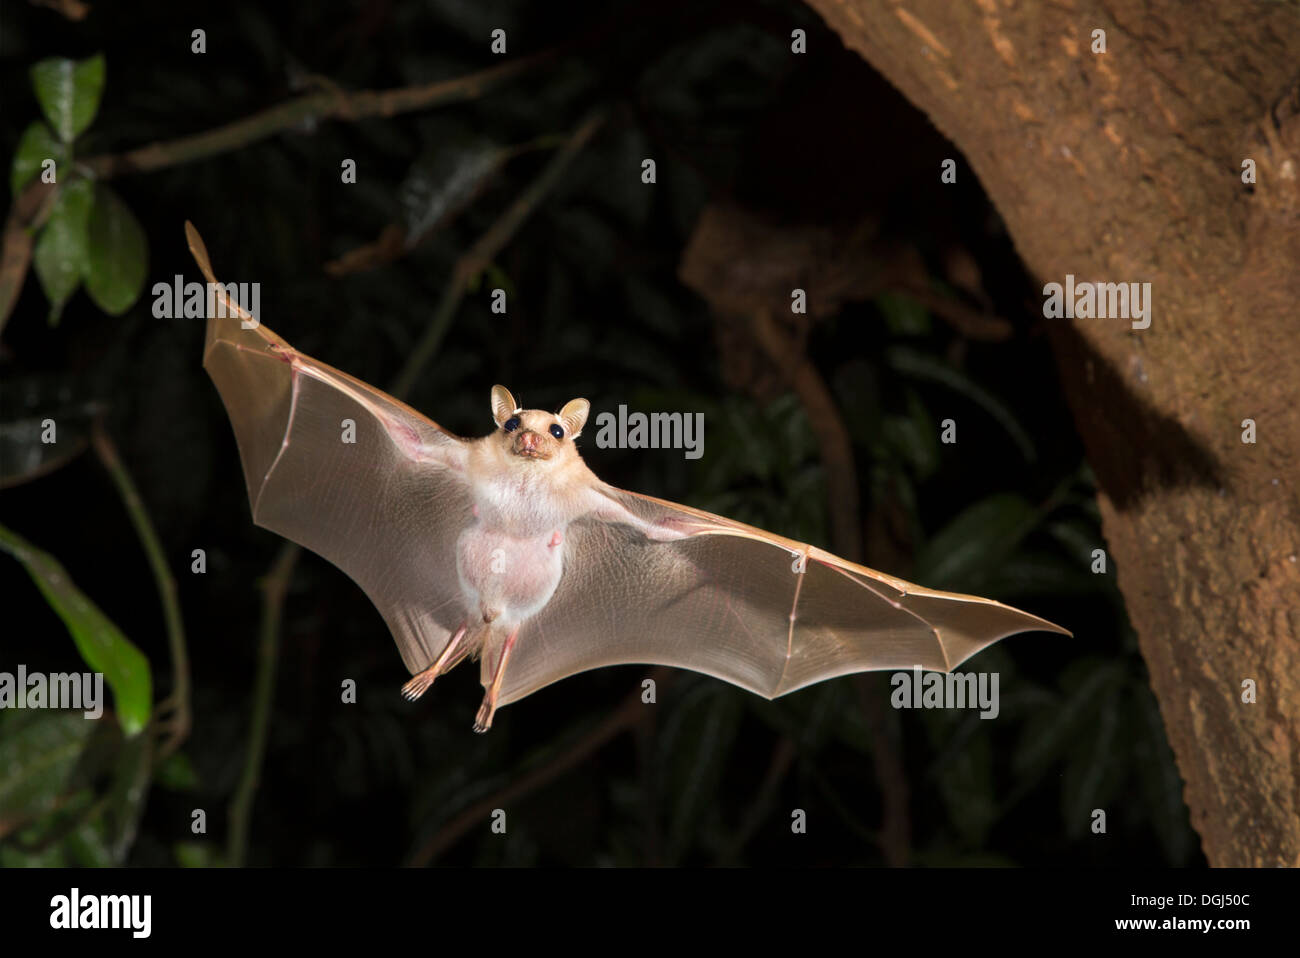 Peter's dwarf epauletted fruit bat (Micropteropus pussilus) flying at night, Ghana. Stock Photo